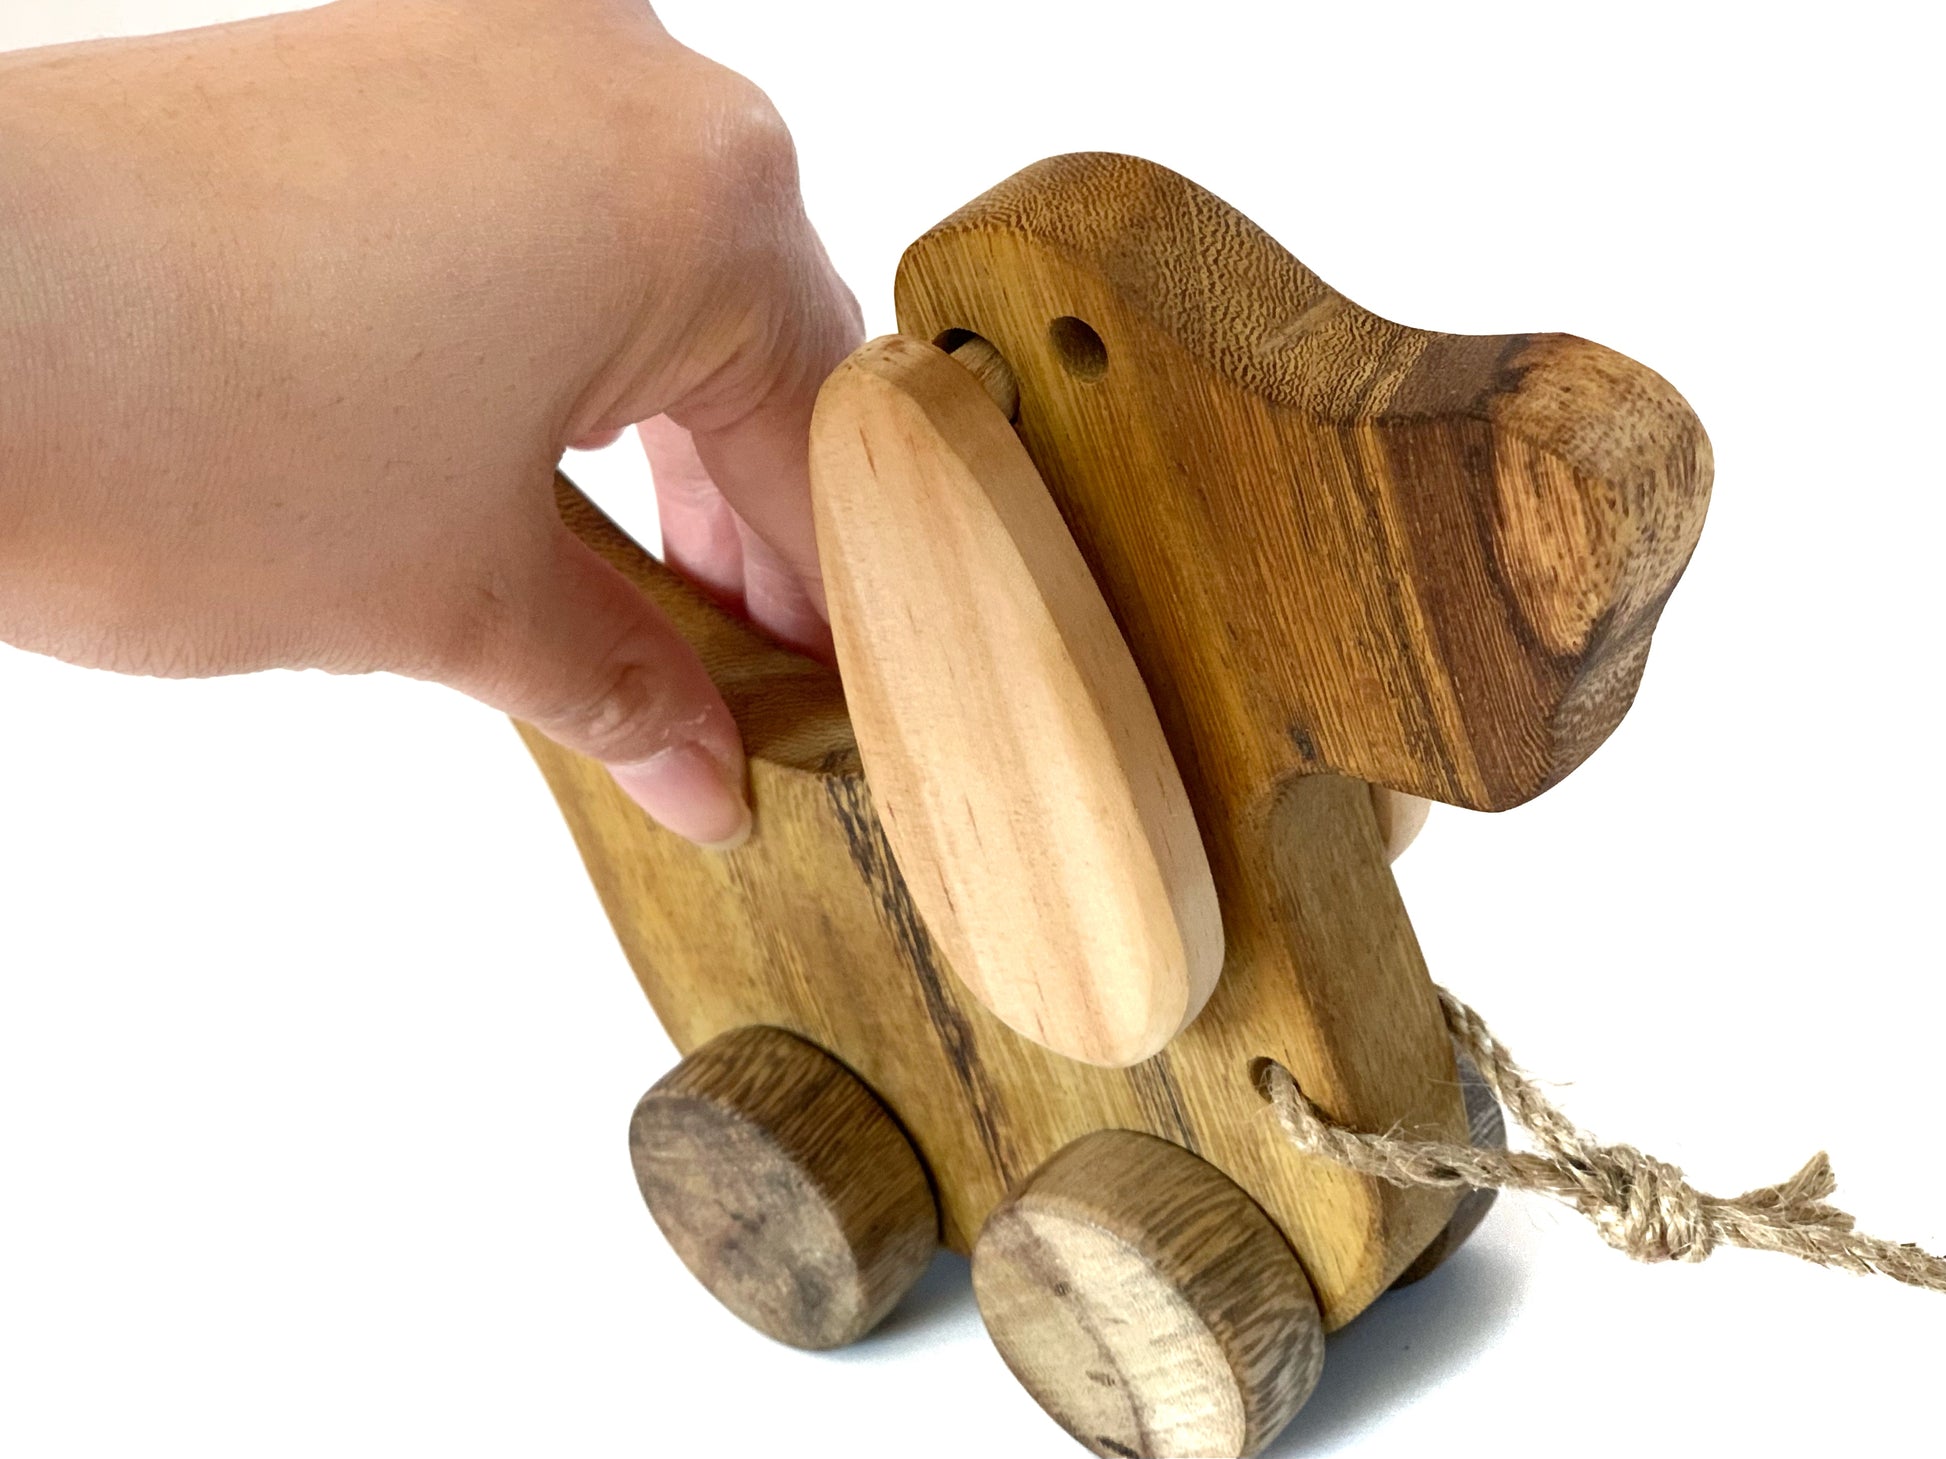 Wooden Dog Pull Toy - My first wooden toy